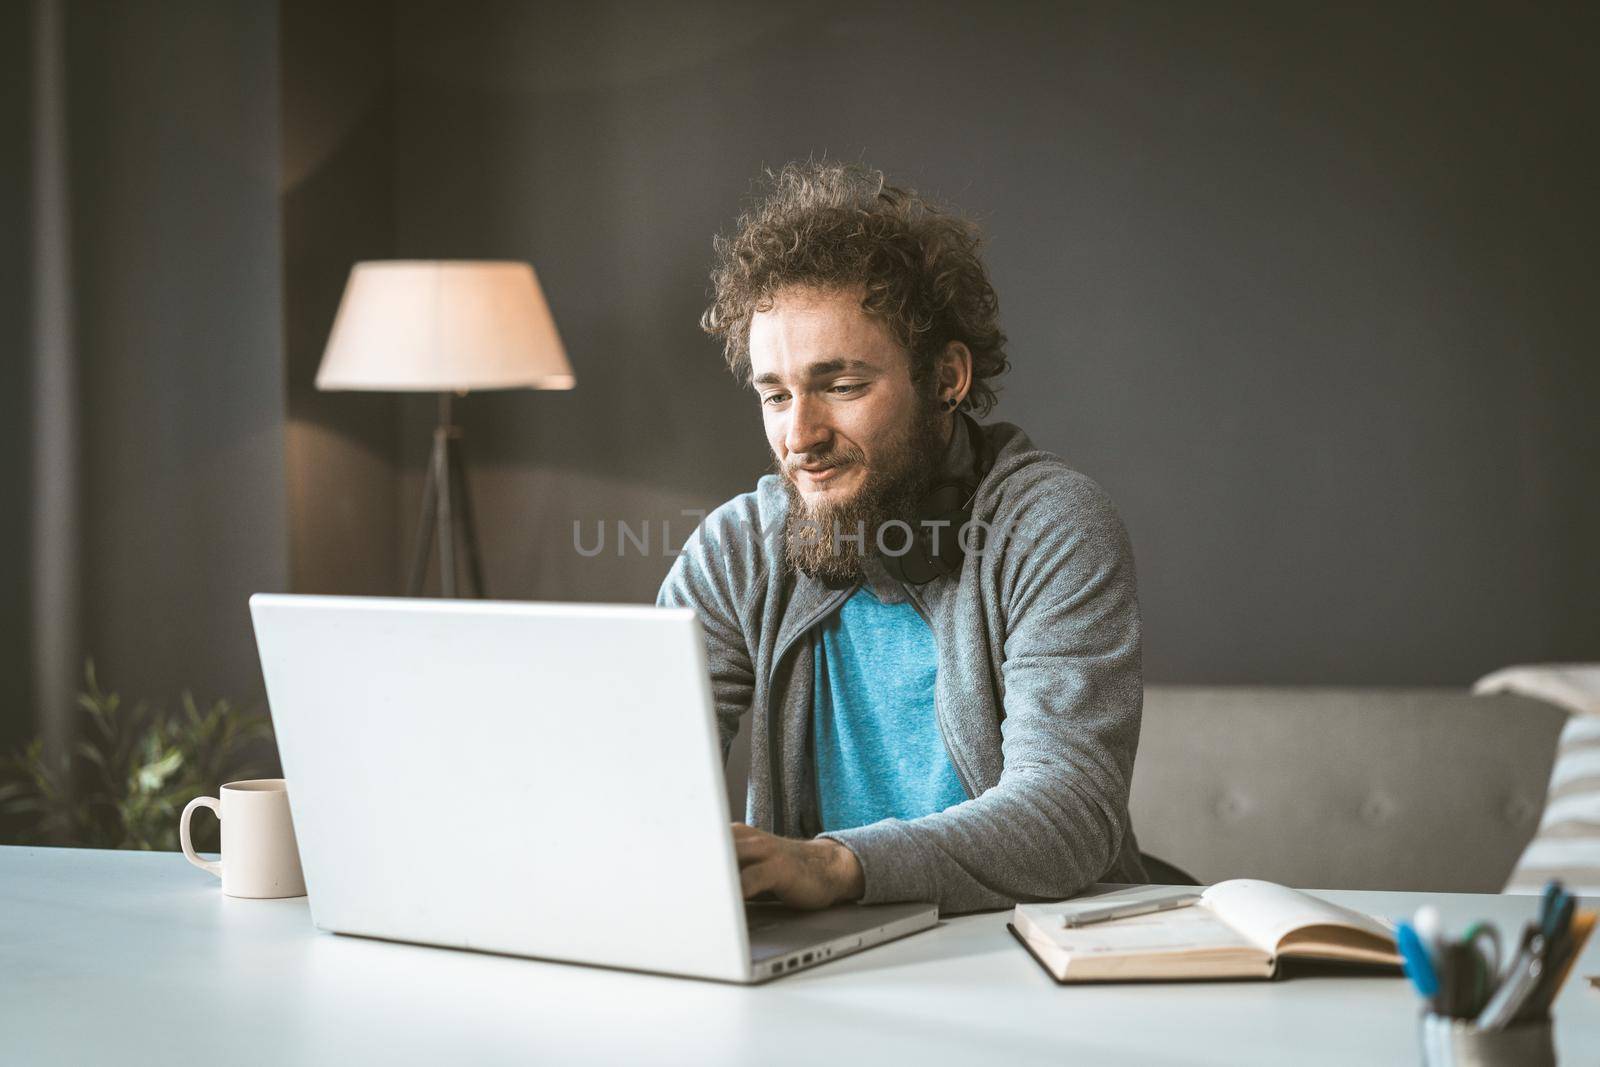 The copywriter works from home to write the article. A young man with curly hair is typing on a laptop. Work at home is a concept. by LipikStockMedia